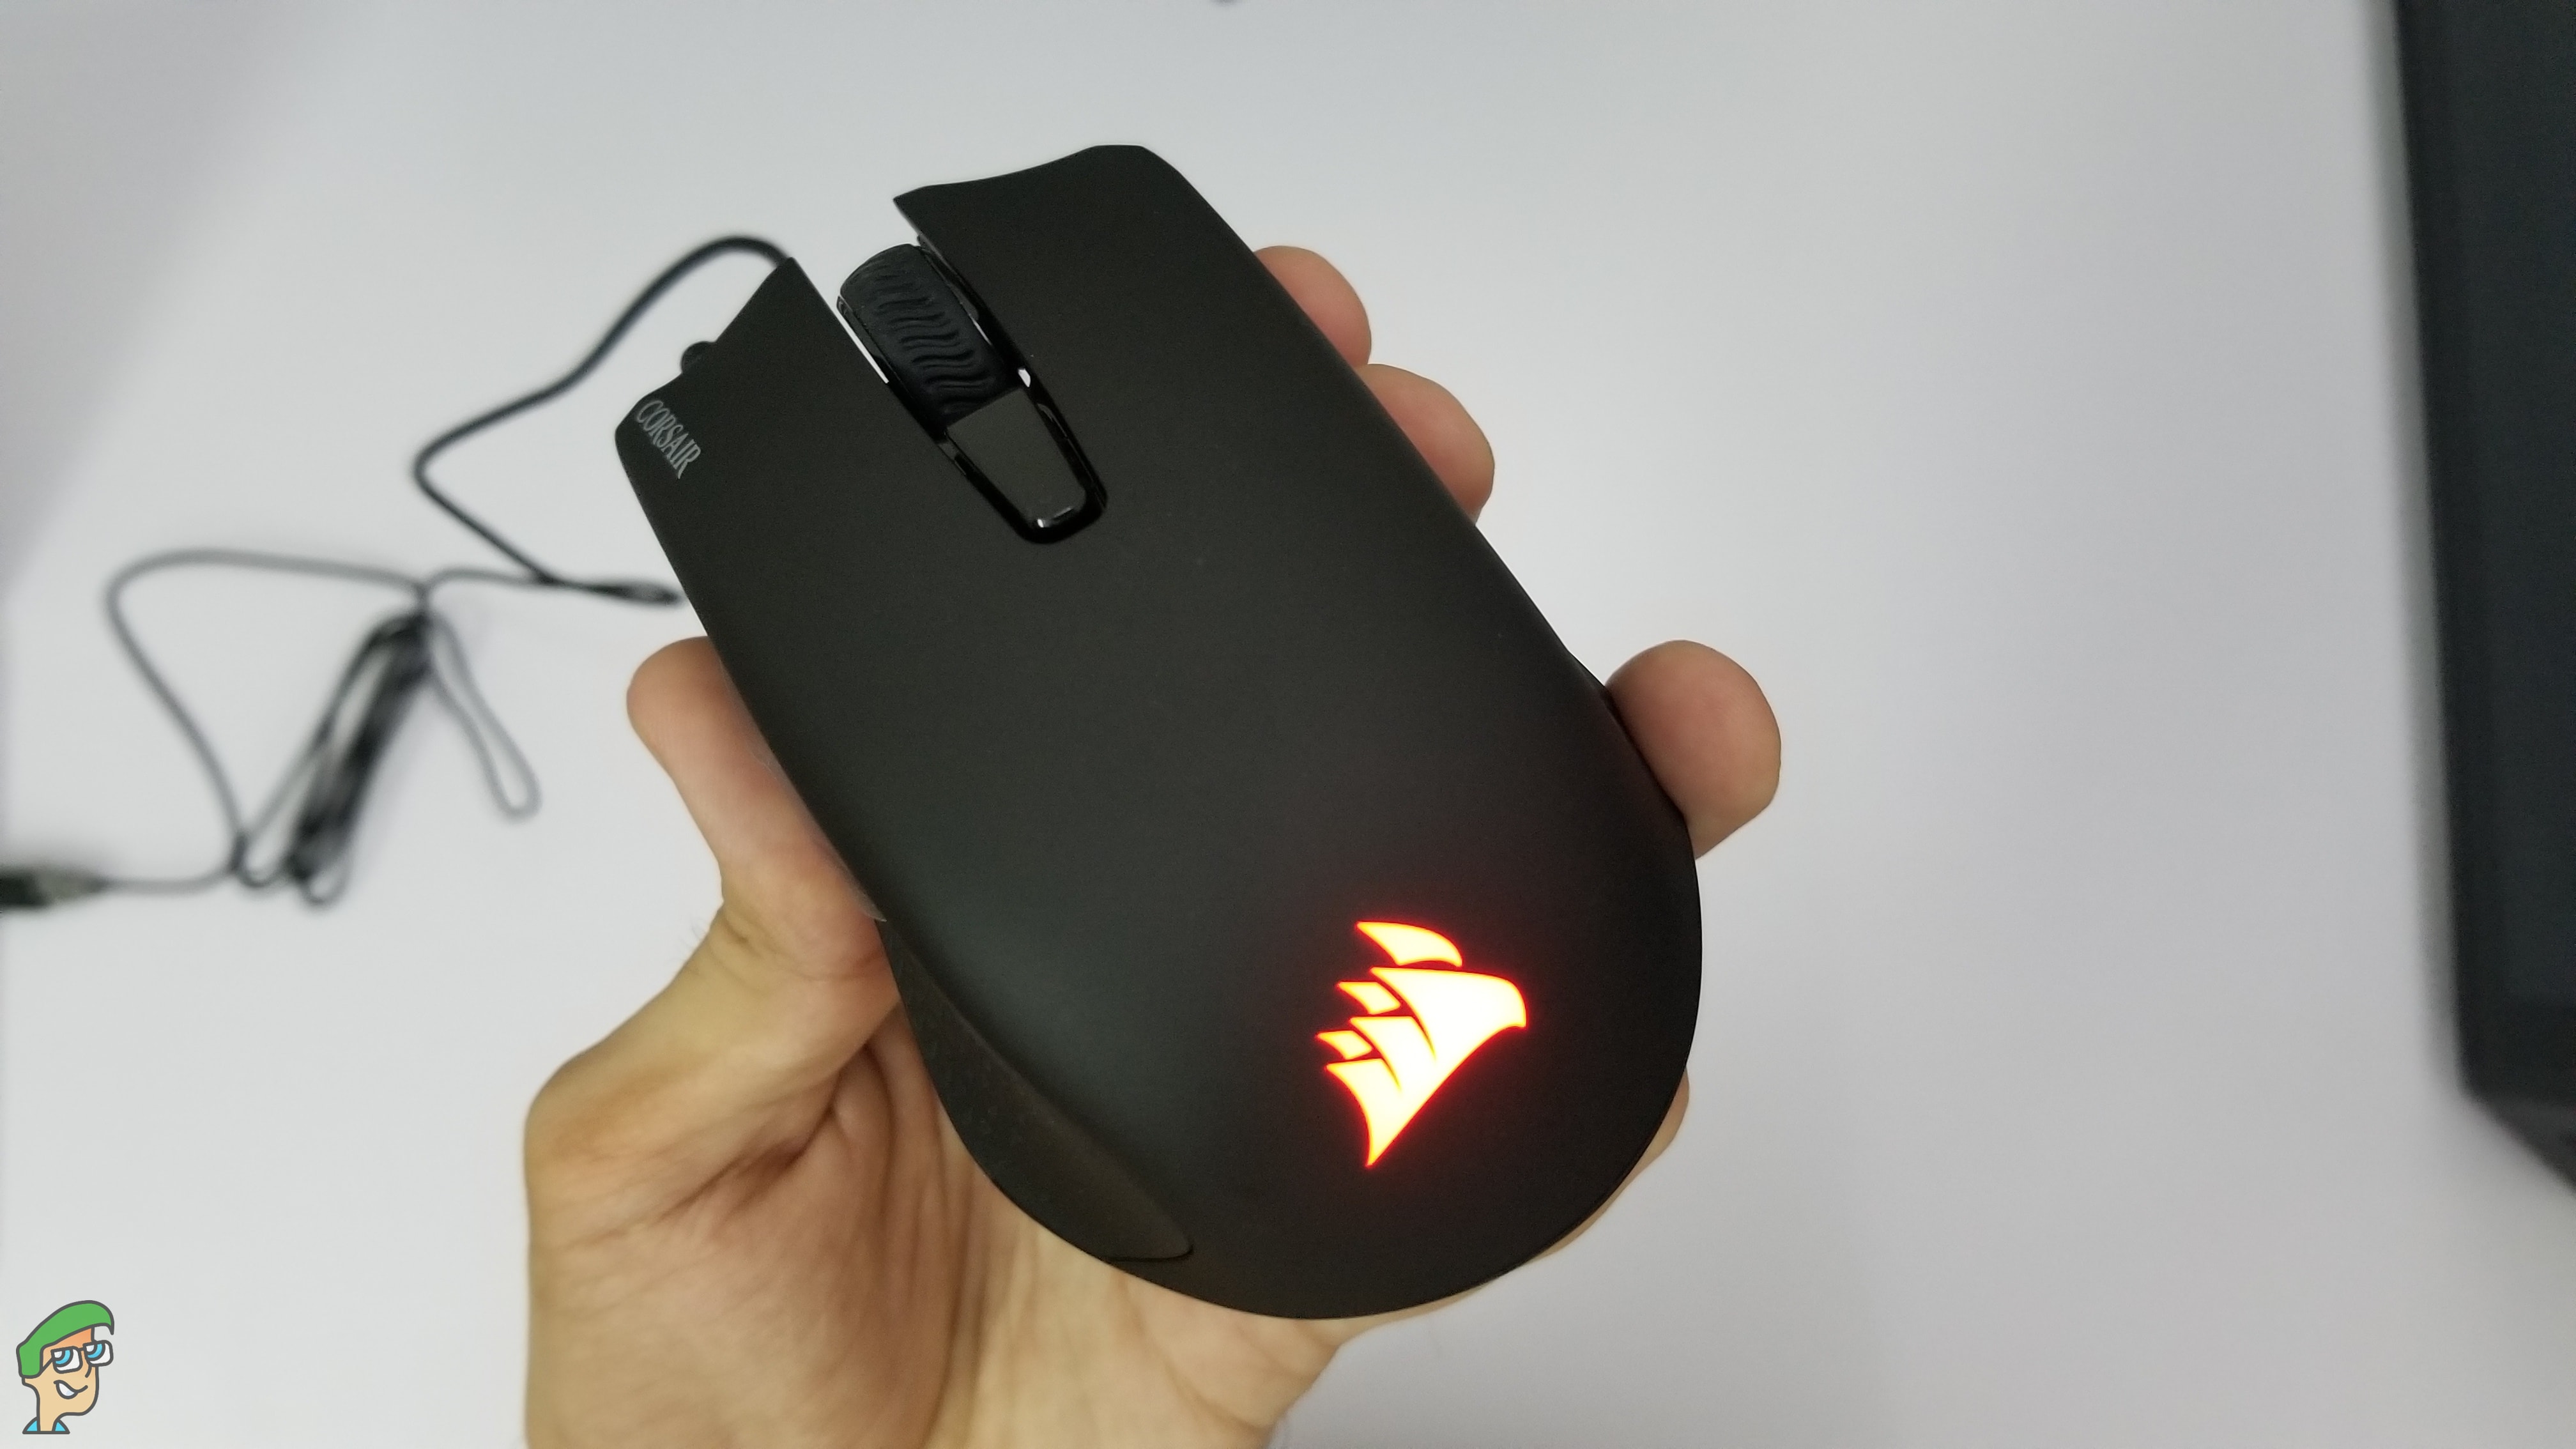 Corsair Harpoon Rgb Gaming Mouse Review Appuals Com